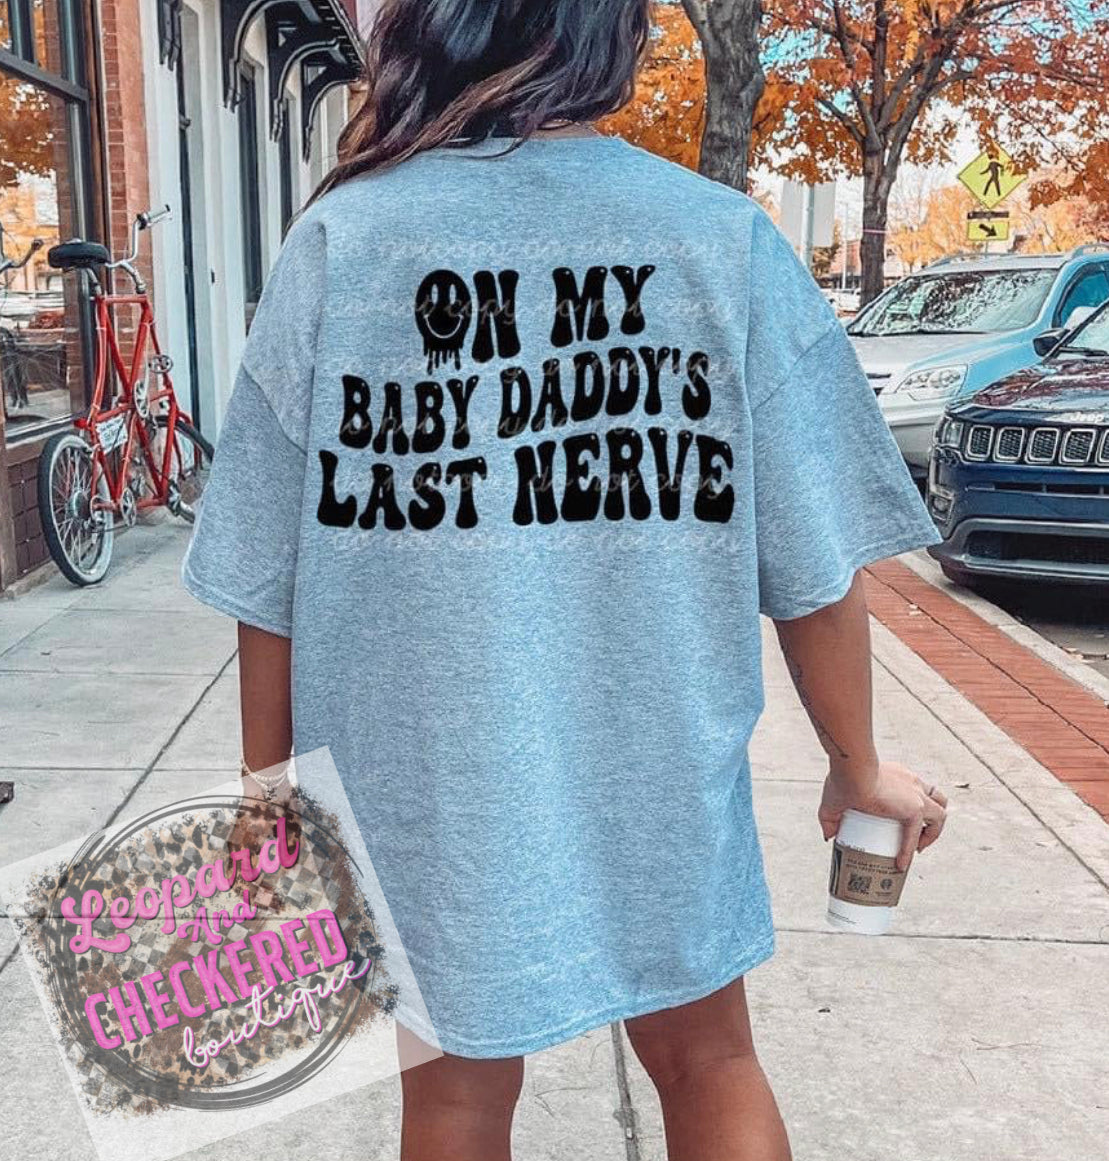 On my baby daddy’s last nerve Tshirt